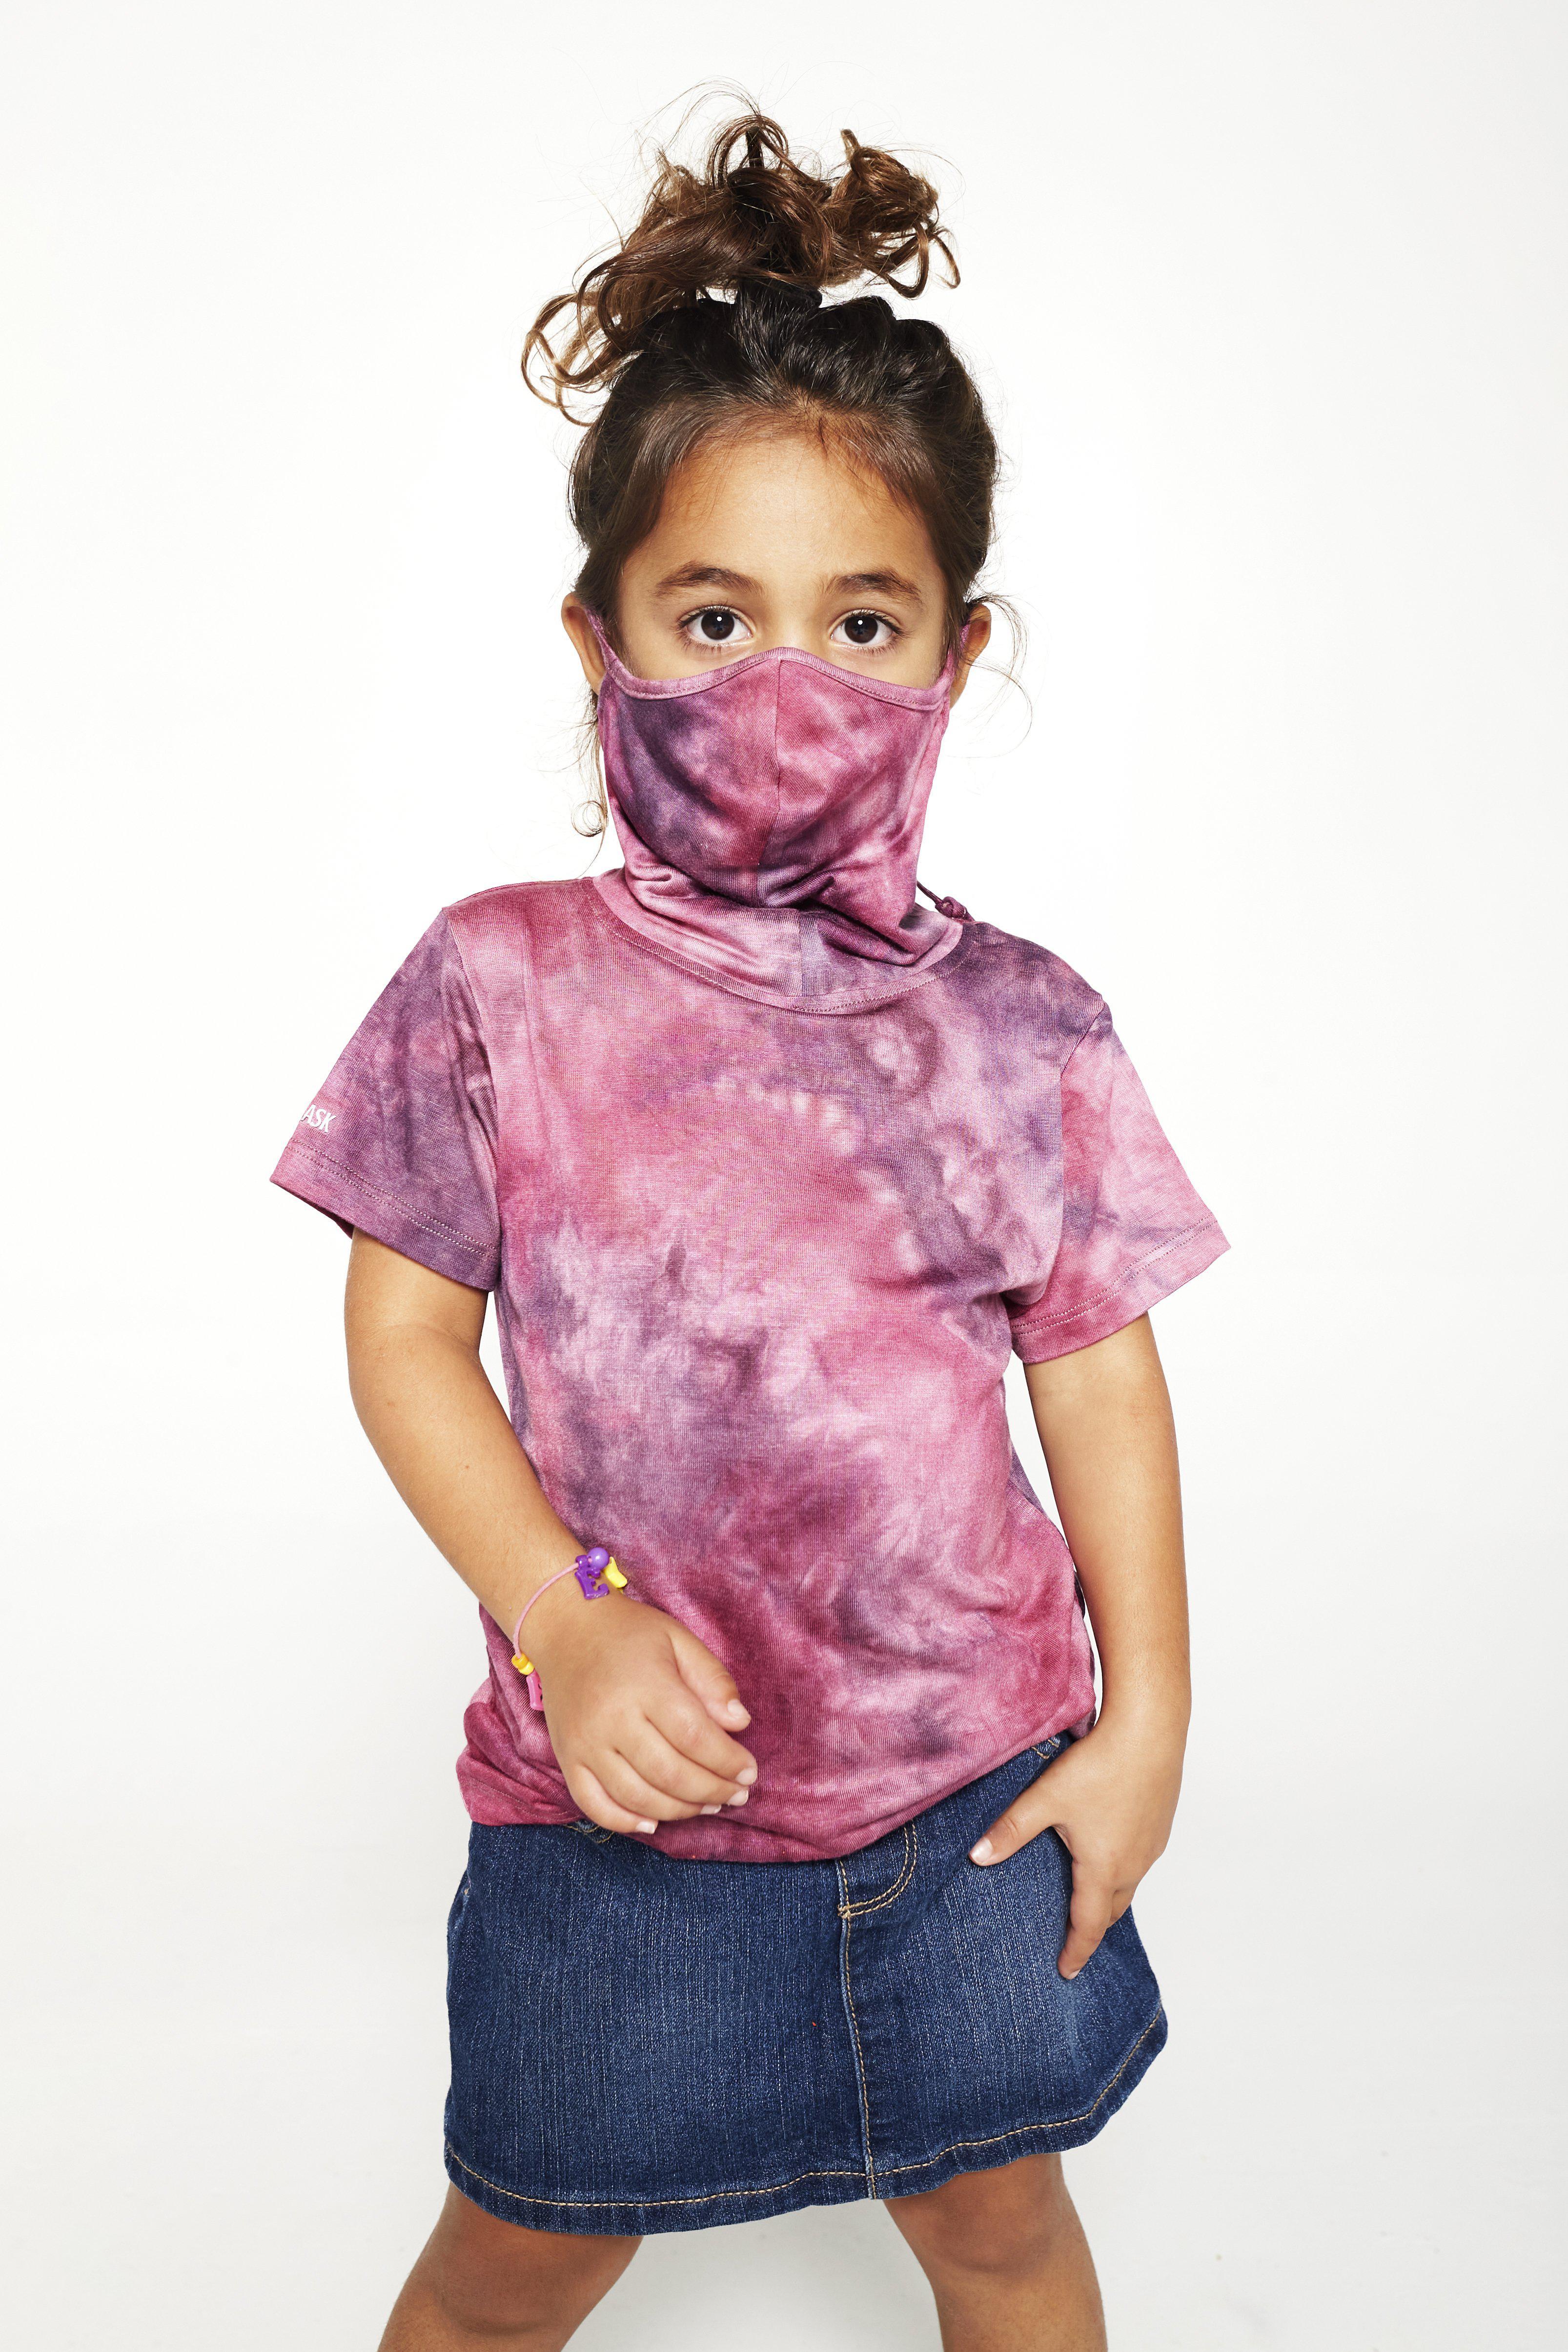 Kids Short Sleeve Pink Purple Tie-dye #6 Shmask™ Earloop Face Mask for Kids and Adults